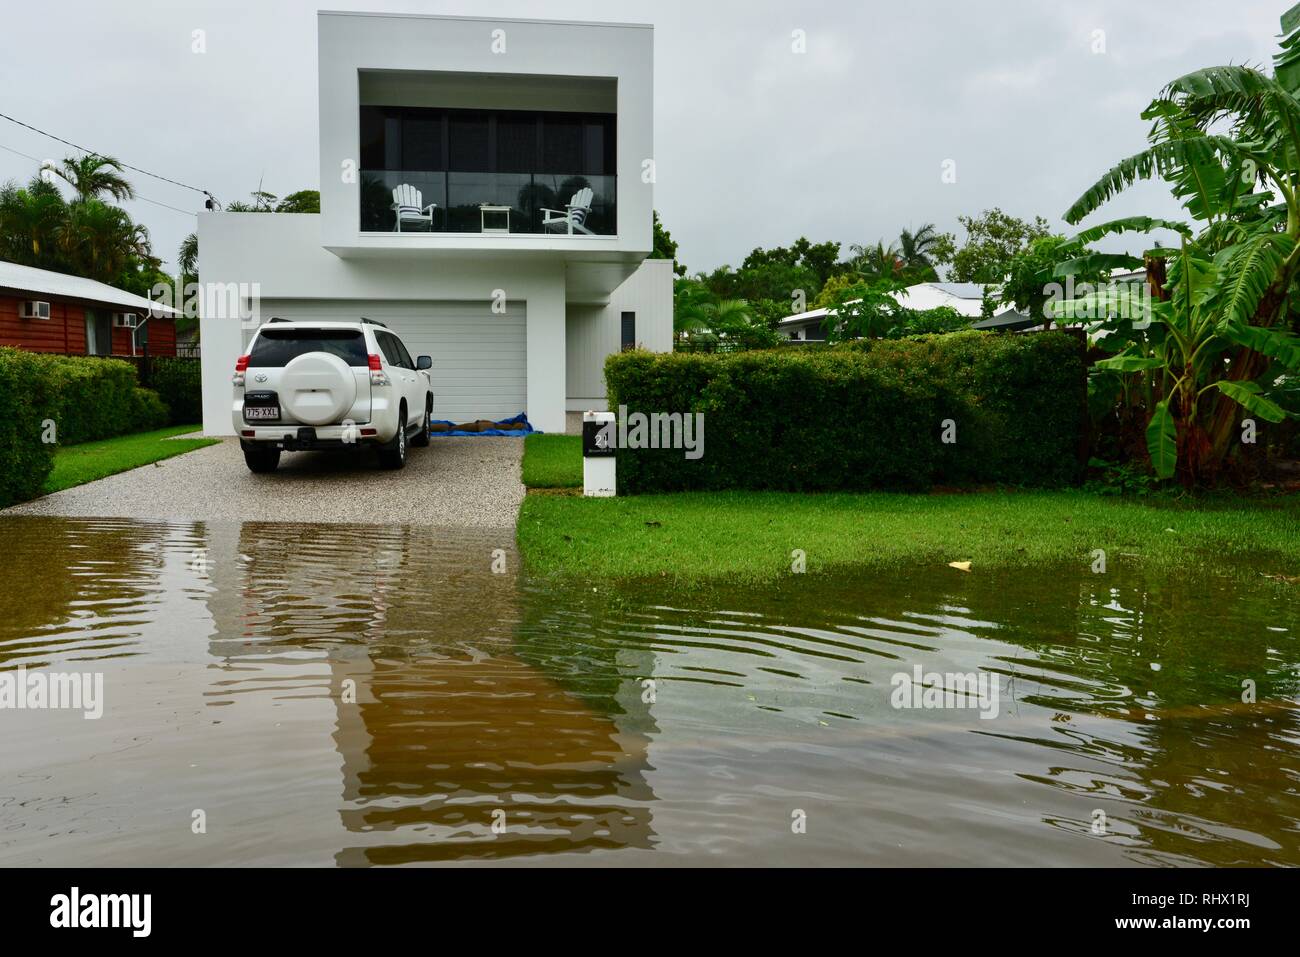 A car parked in a driveway sitting near flood waters. Townsville, Queensland, Australia. 4th Feb 2019. Flooding continued to worsen as the deluge continued and more water was released from the bulging Ross River dam to prevent the failure of the dam wall. 1000's of residents were evacuated overnight. Credit: P&F Photography/Alamy Live News Stock Photo